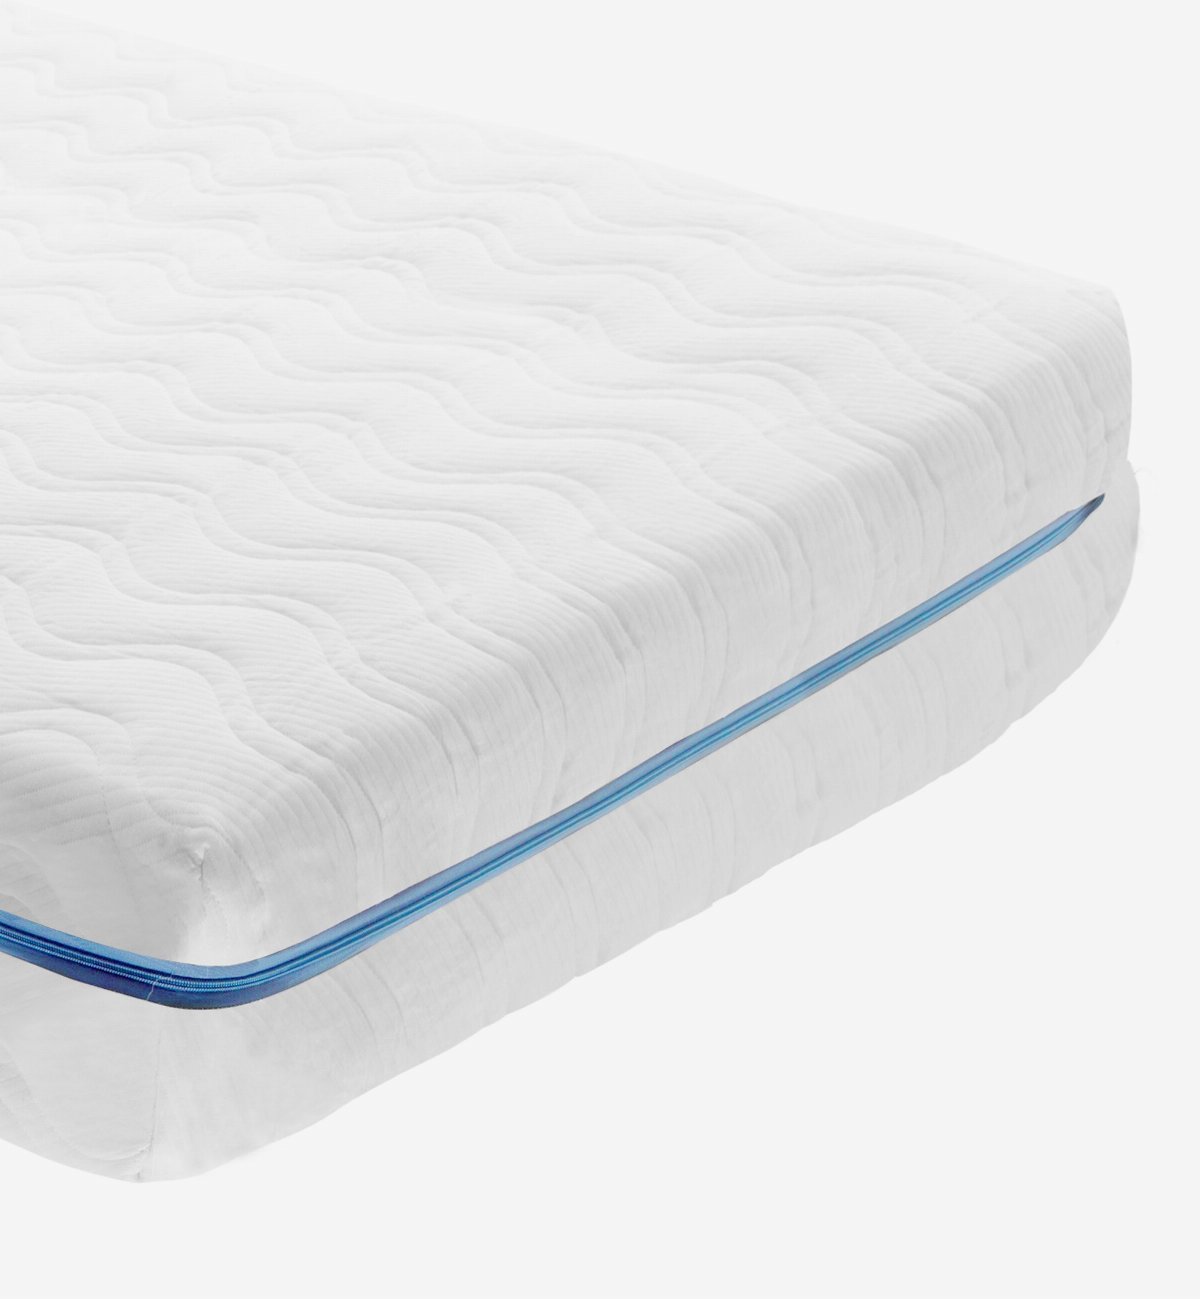 Adult mattress Evolution Air with breathable mattress cover and duvet Kadolis